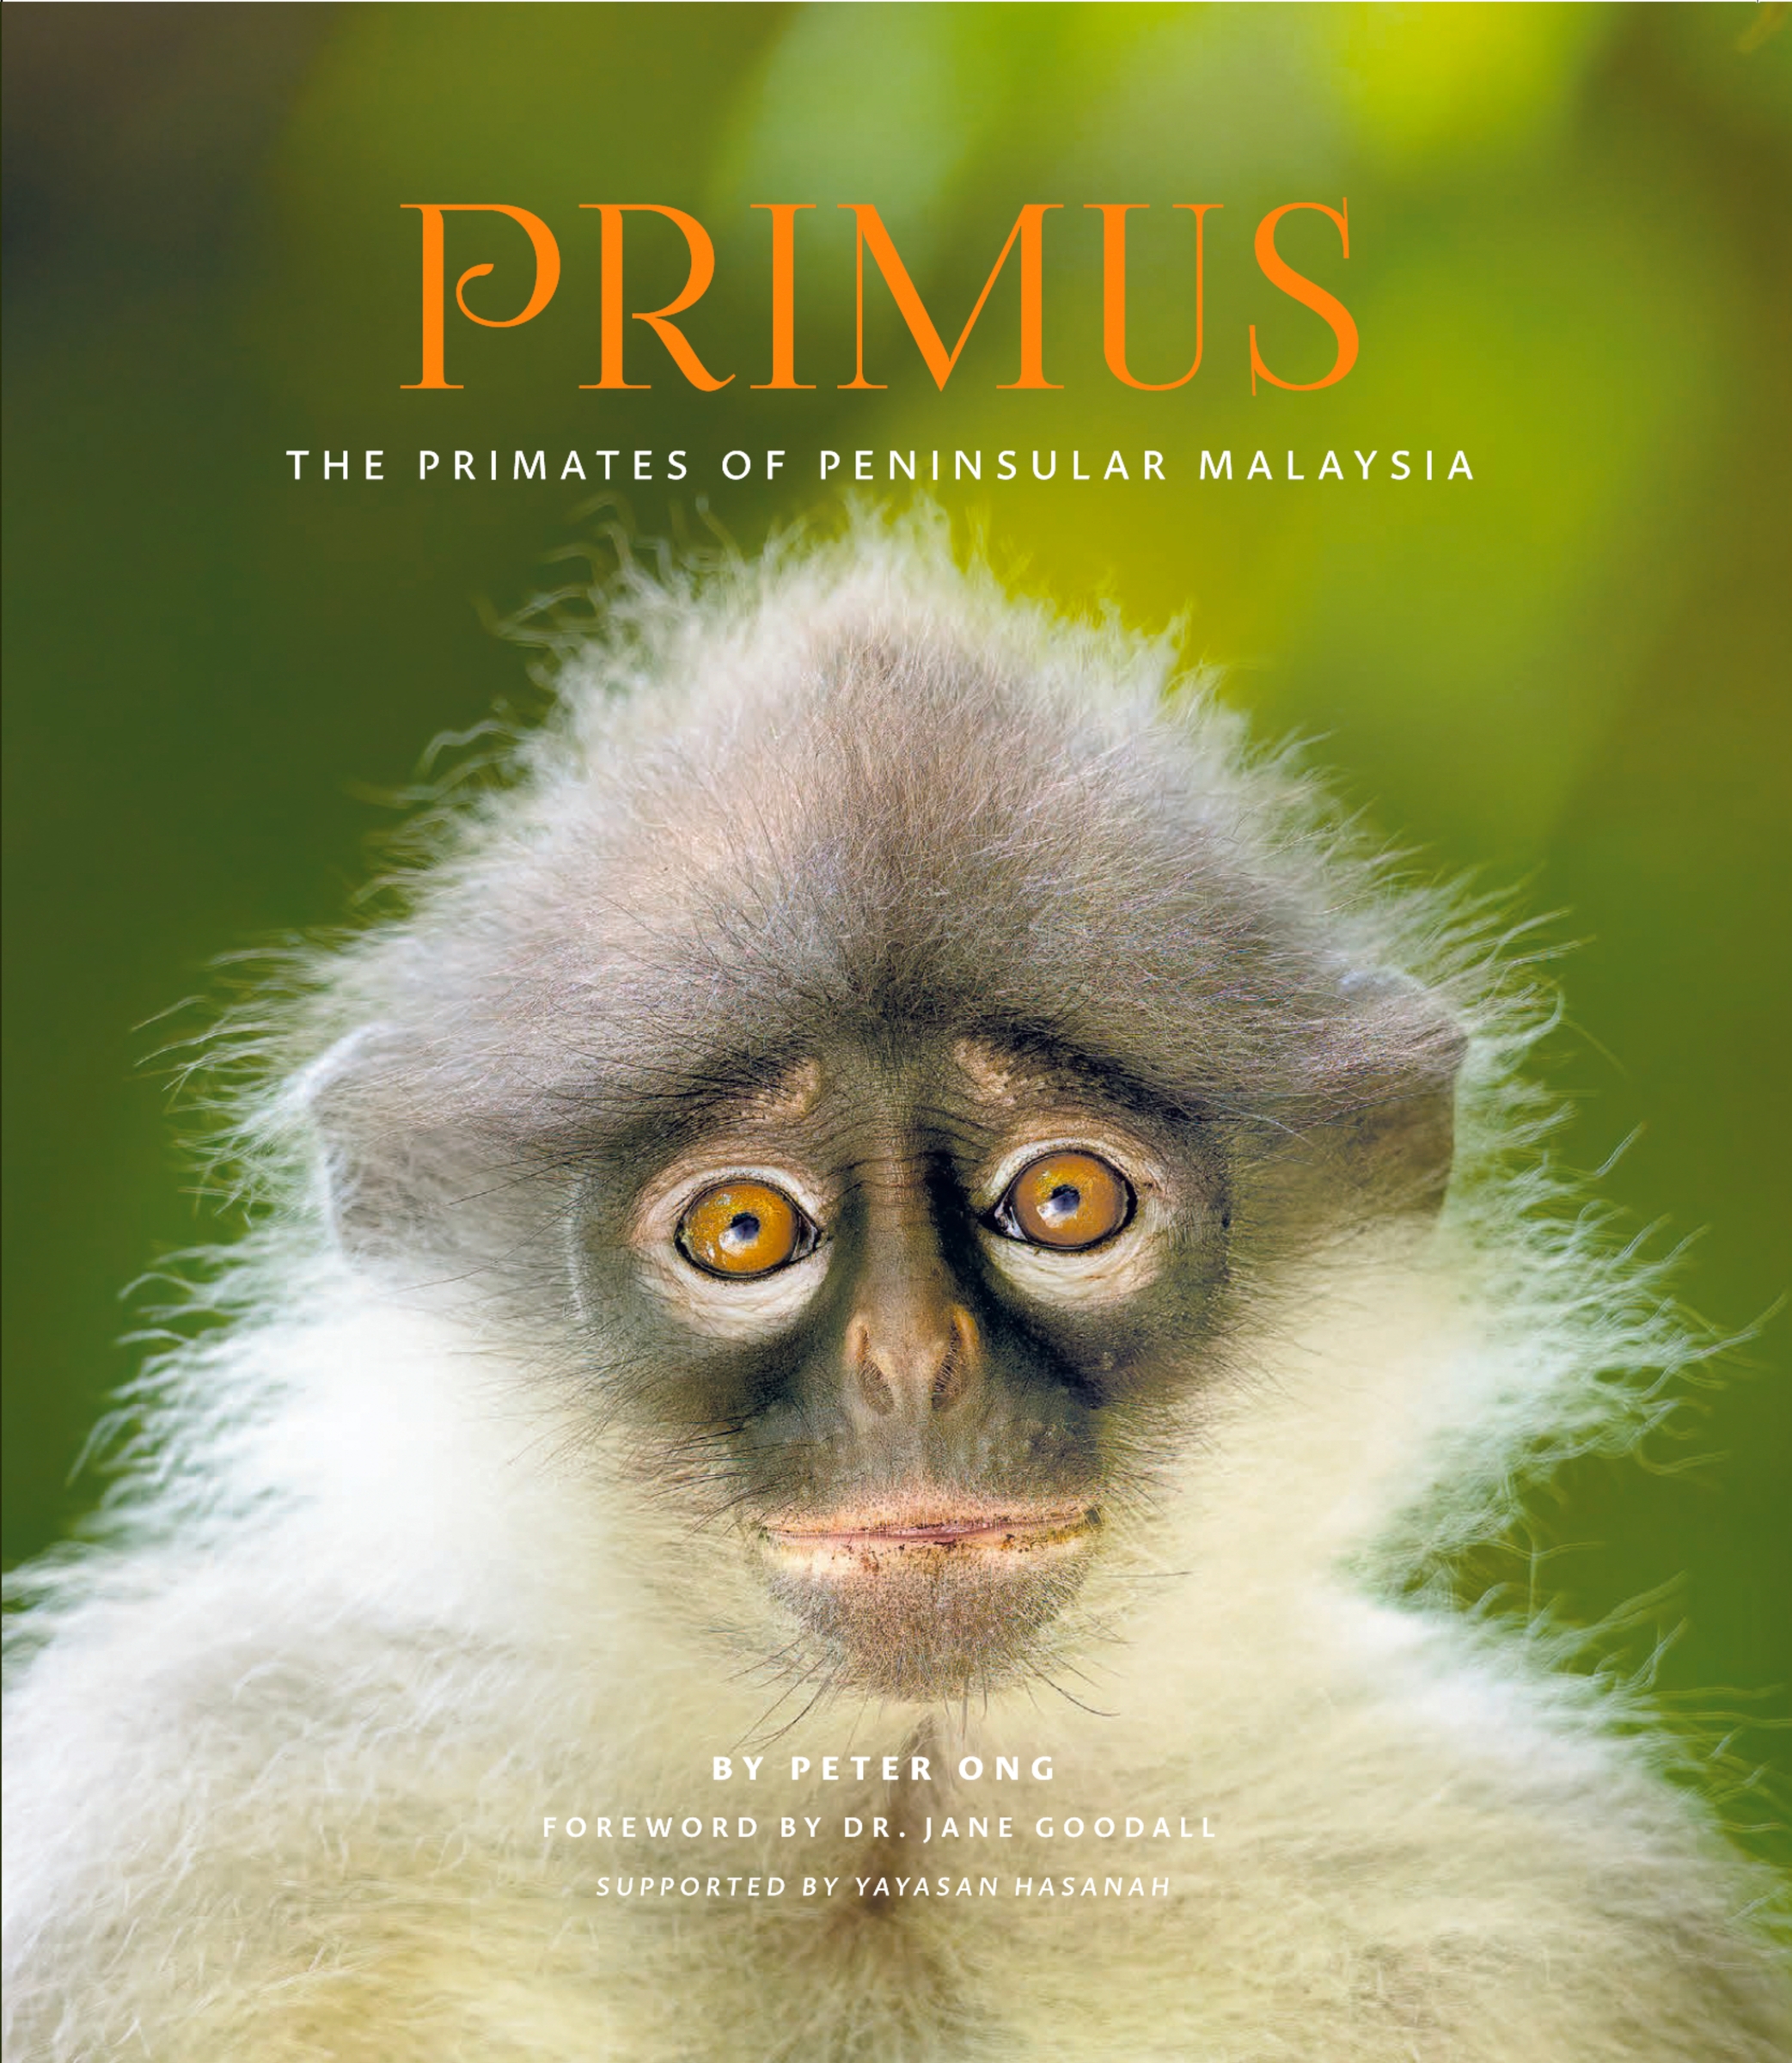 Primus (paperback cover)_page-0001 (1)